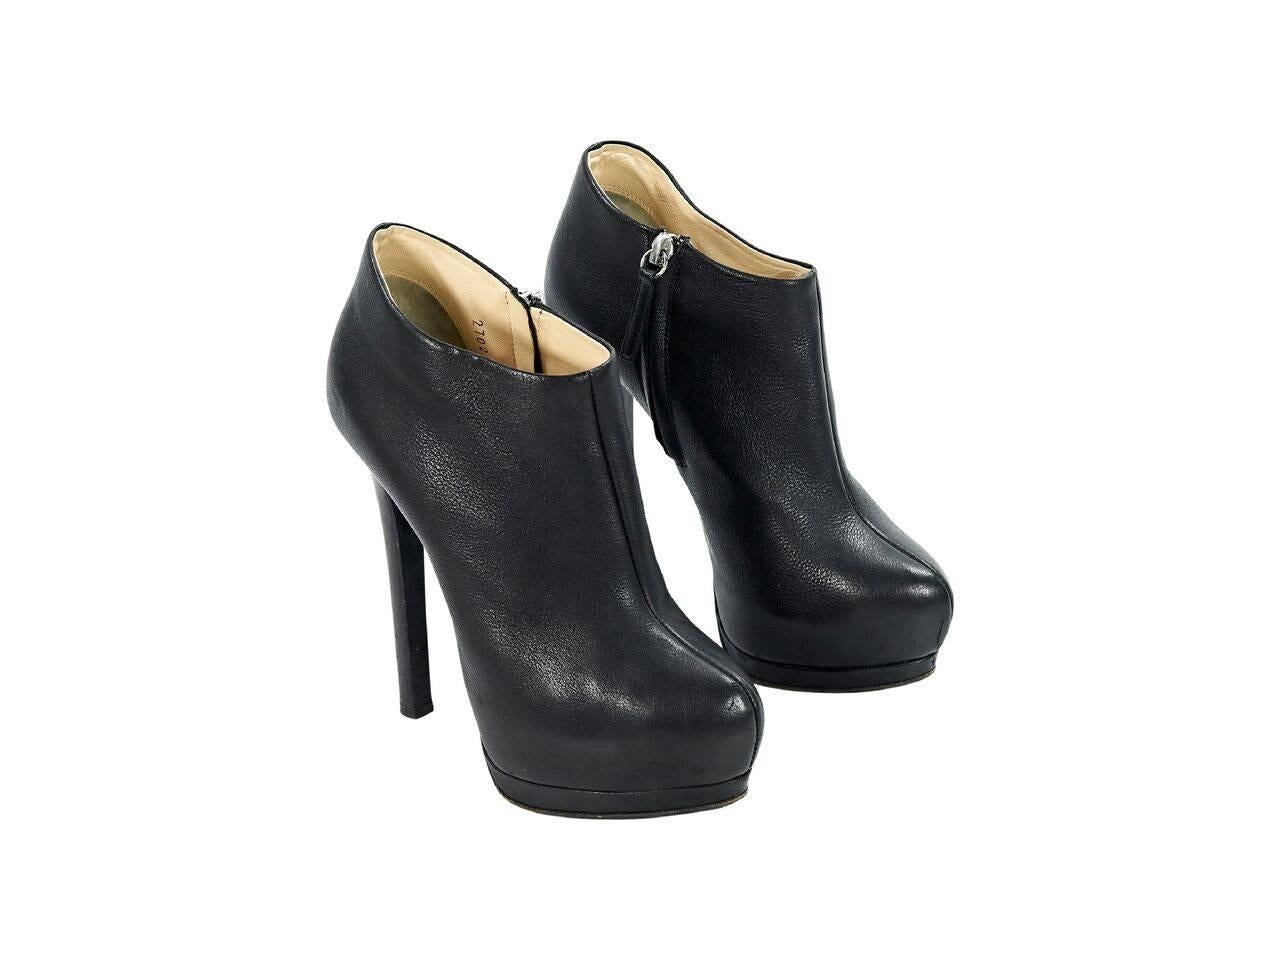 Product details:  Black leather platform ankle boots by Giuseppe Zanotti.  Inner zip closure.  Almond toe.  Towering stiletto heel and platform design. 
Condition: Pre-owned. Very good.
Est. Retail $ 1,025.00